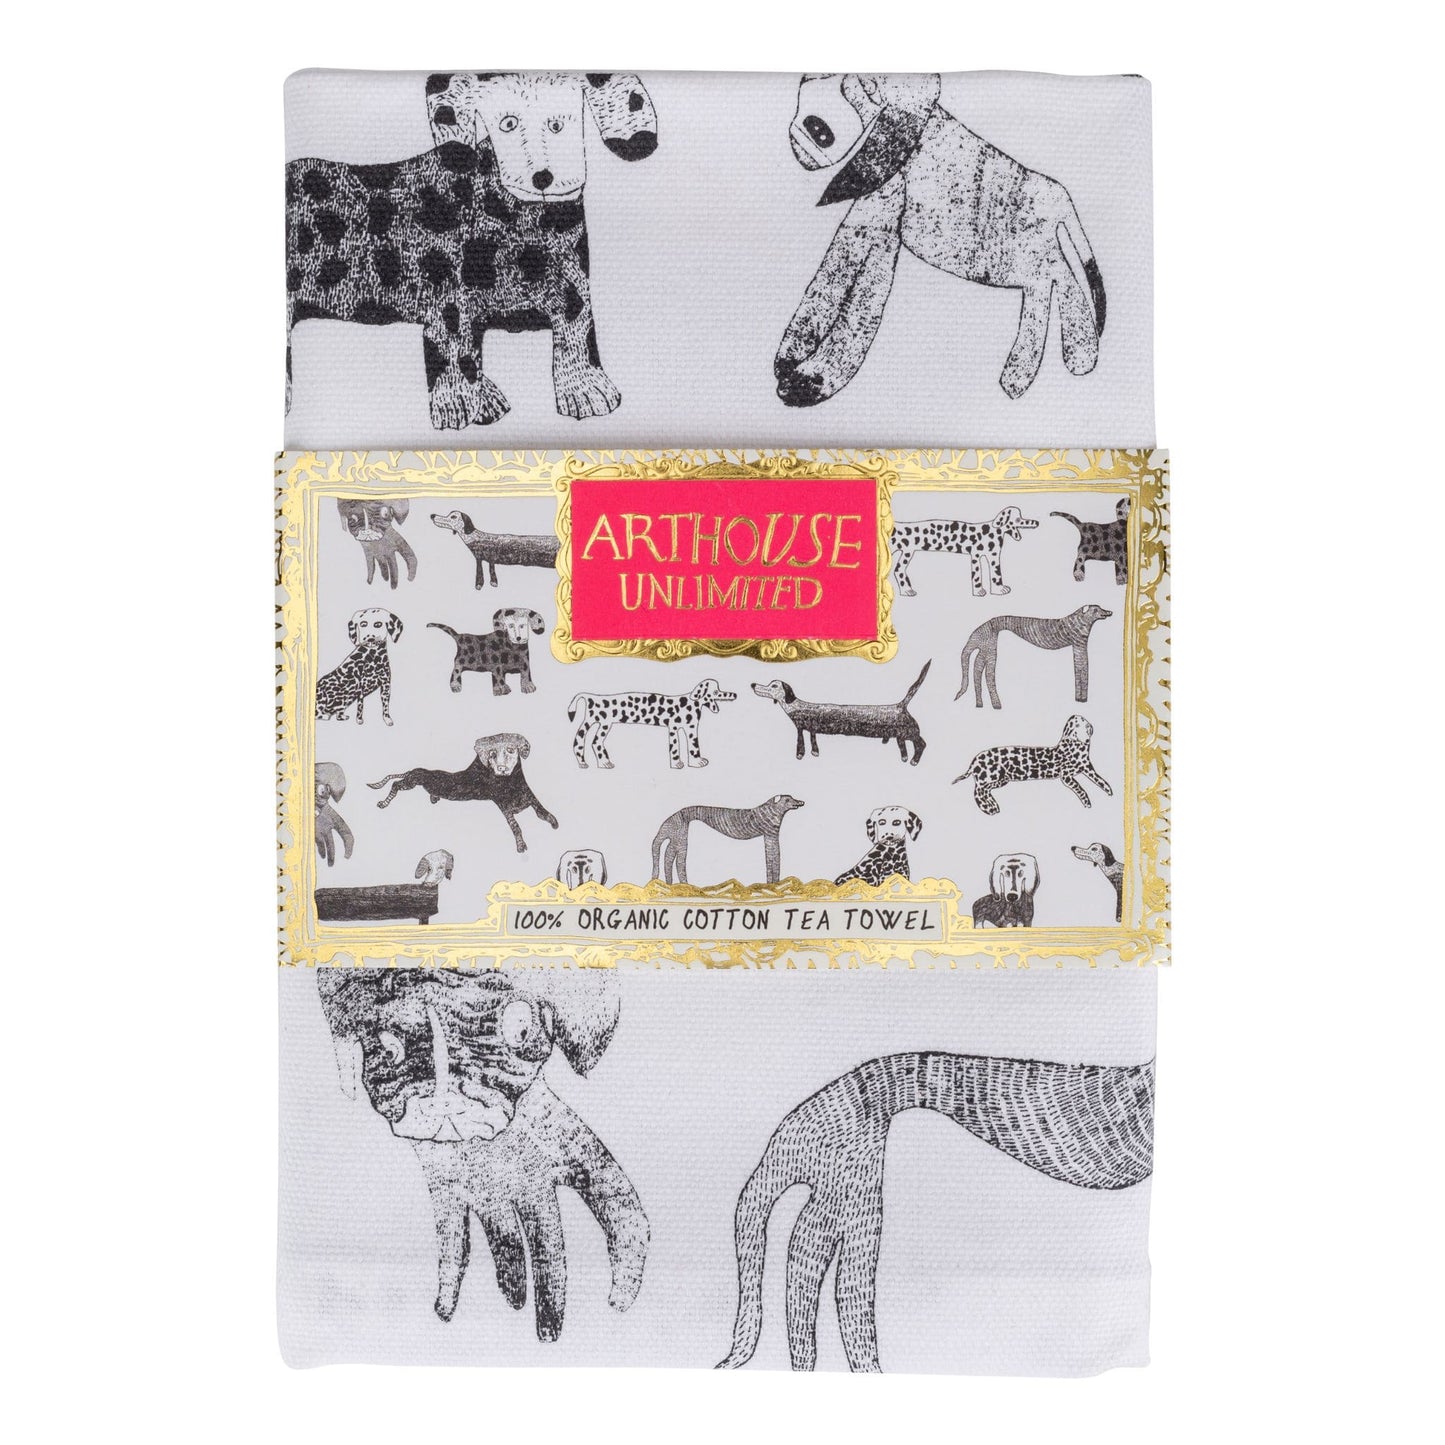 Dogs | Organic Cotton Tea Towel - in packaging